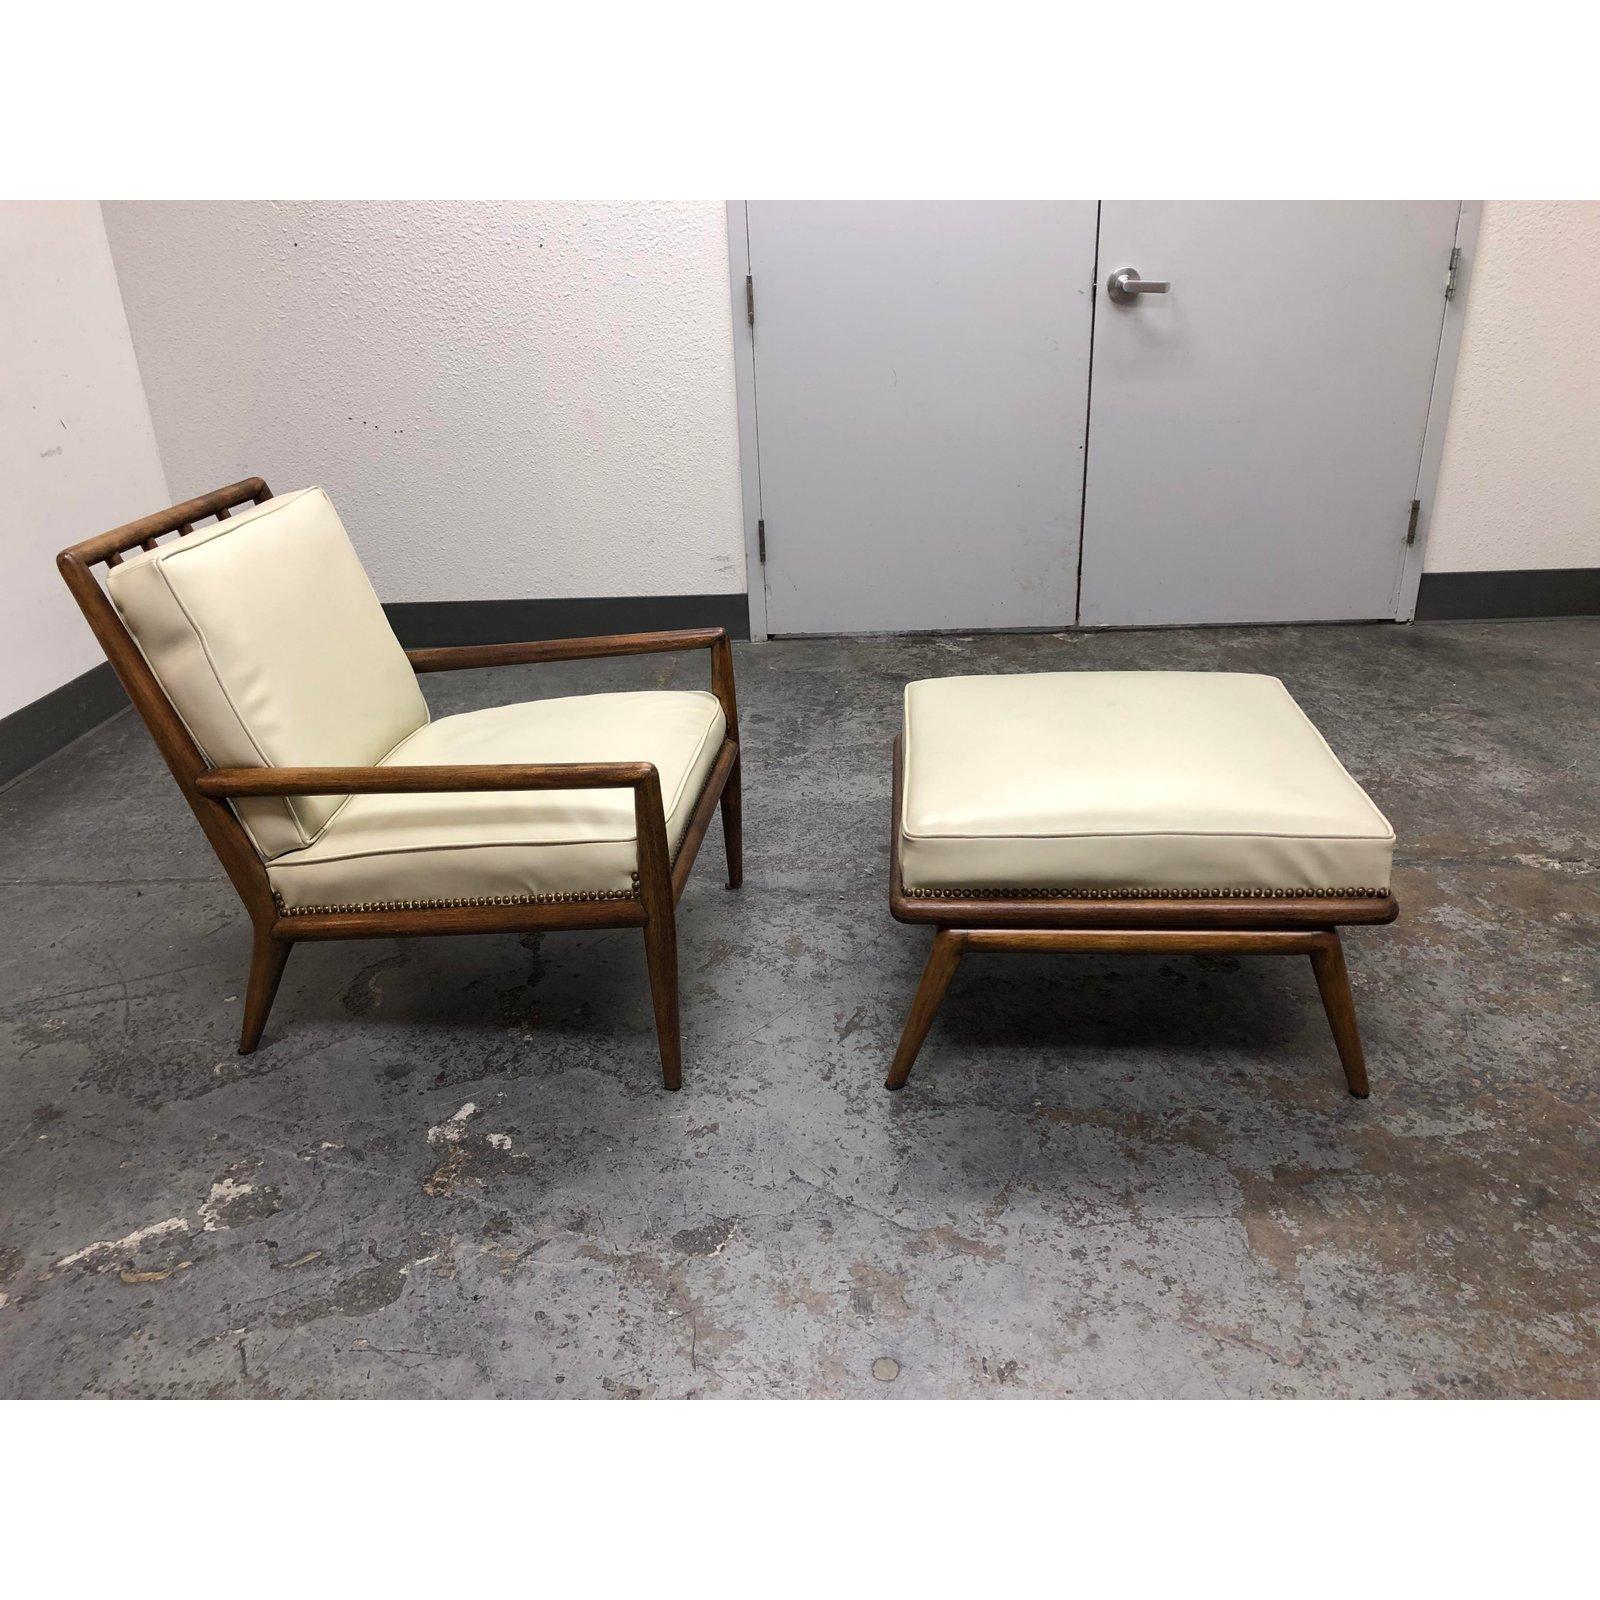 A midcentury chair and ottoman. Originally purchased from an antique showroom. The frame is crafted from solid woods in a walnut finish. Upholstered in an ivory leather. Minor condition on ottoman corner and towards bottom of seat. The back cushions